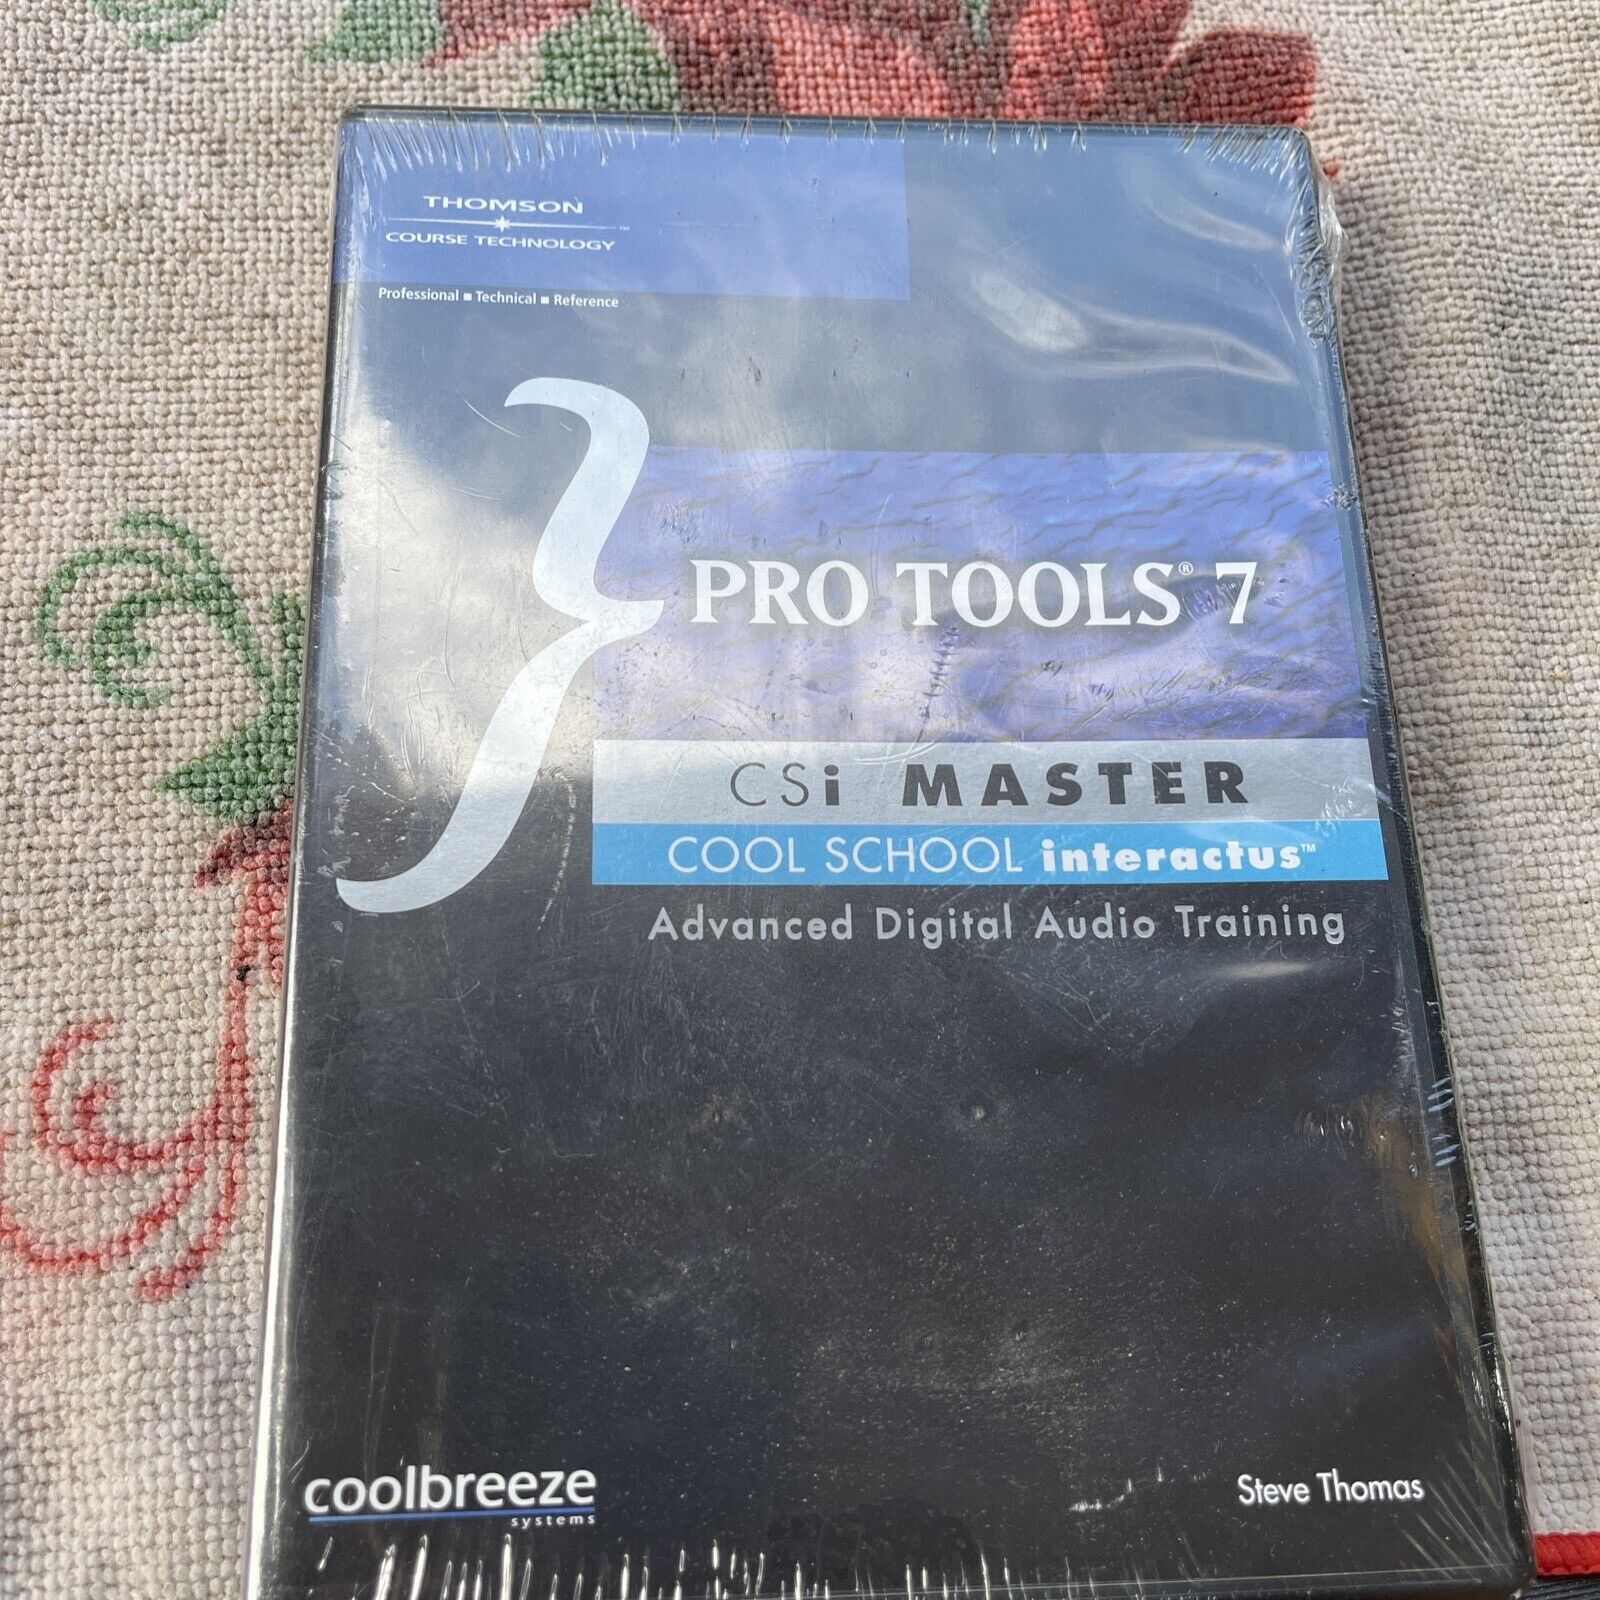 Pro Tools 7 CSi Master, Method One, 101 Official Coursework DVD instructional 69